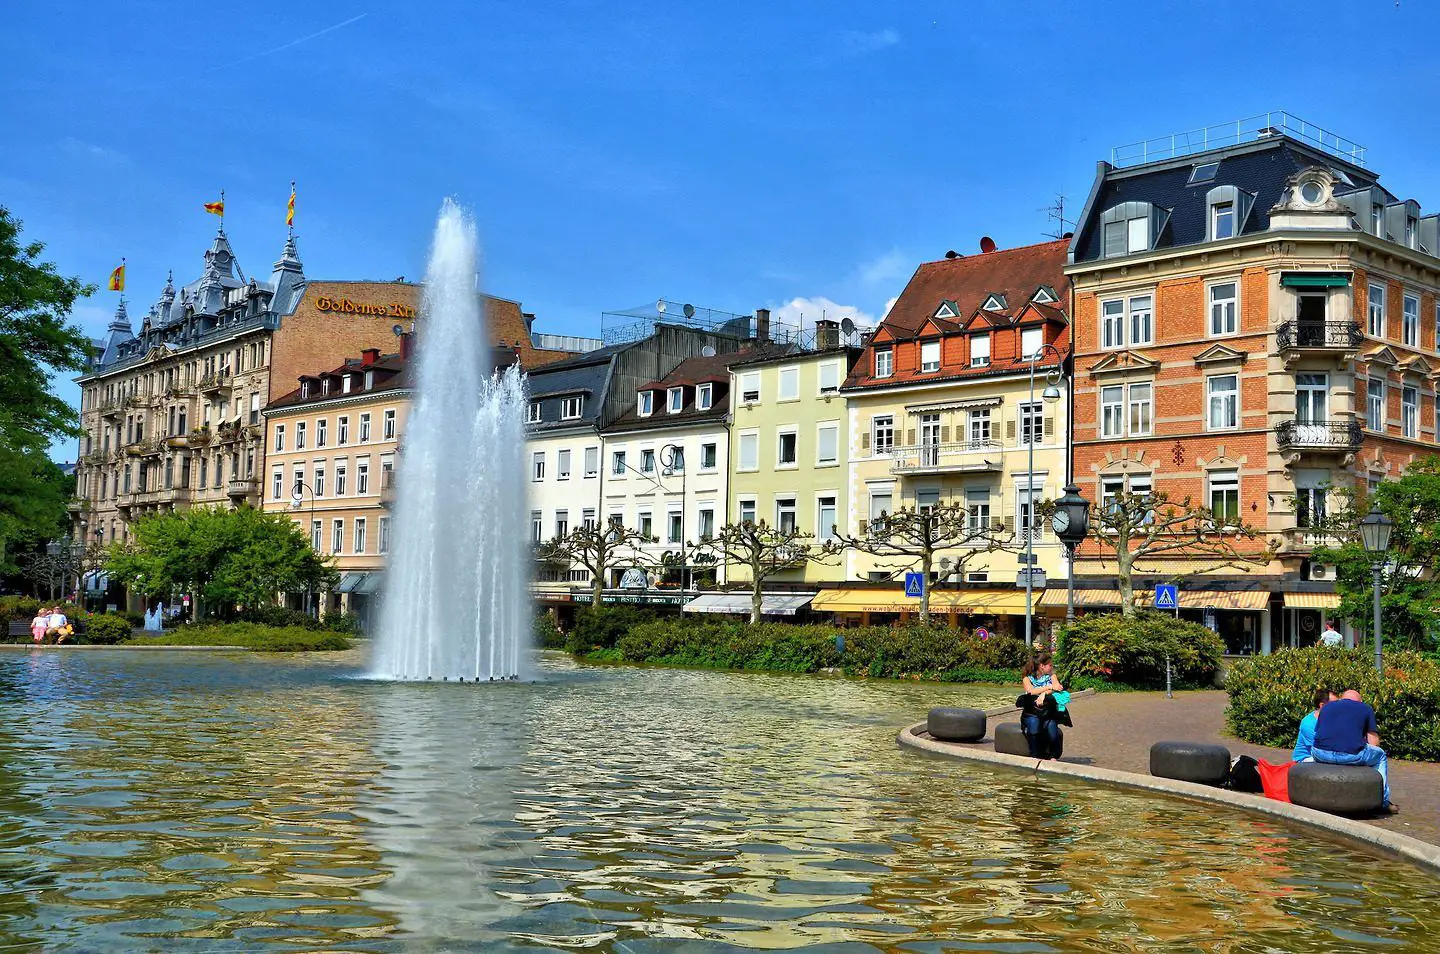 Tourist's guide to the spa city of Baden-Baden in Germany